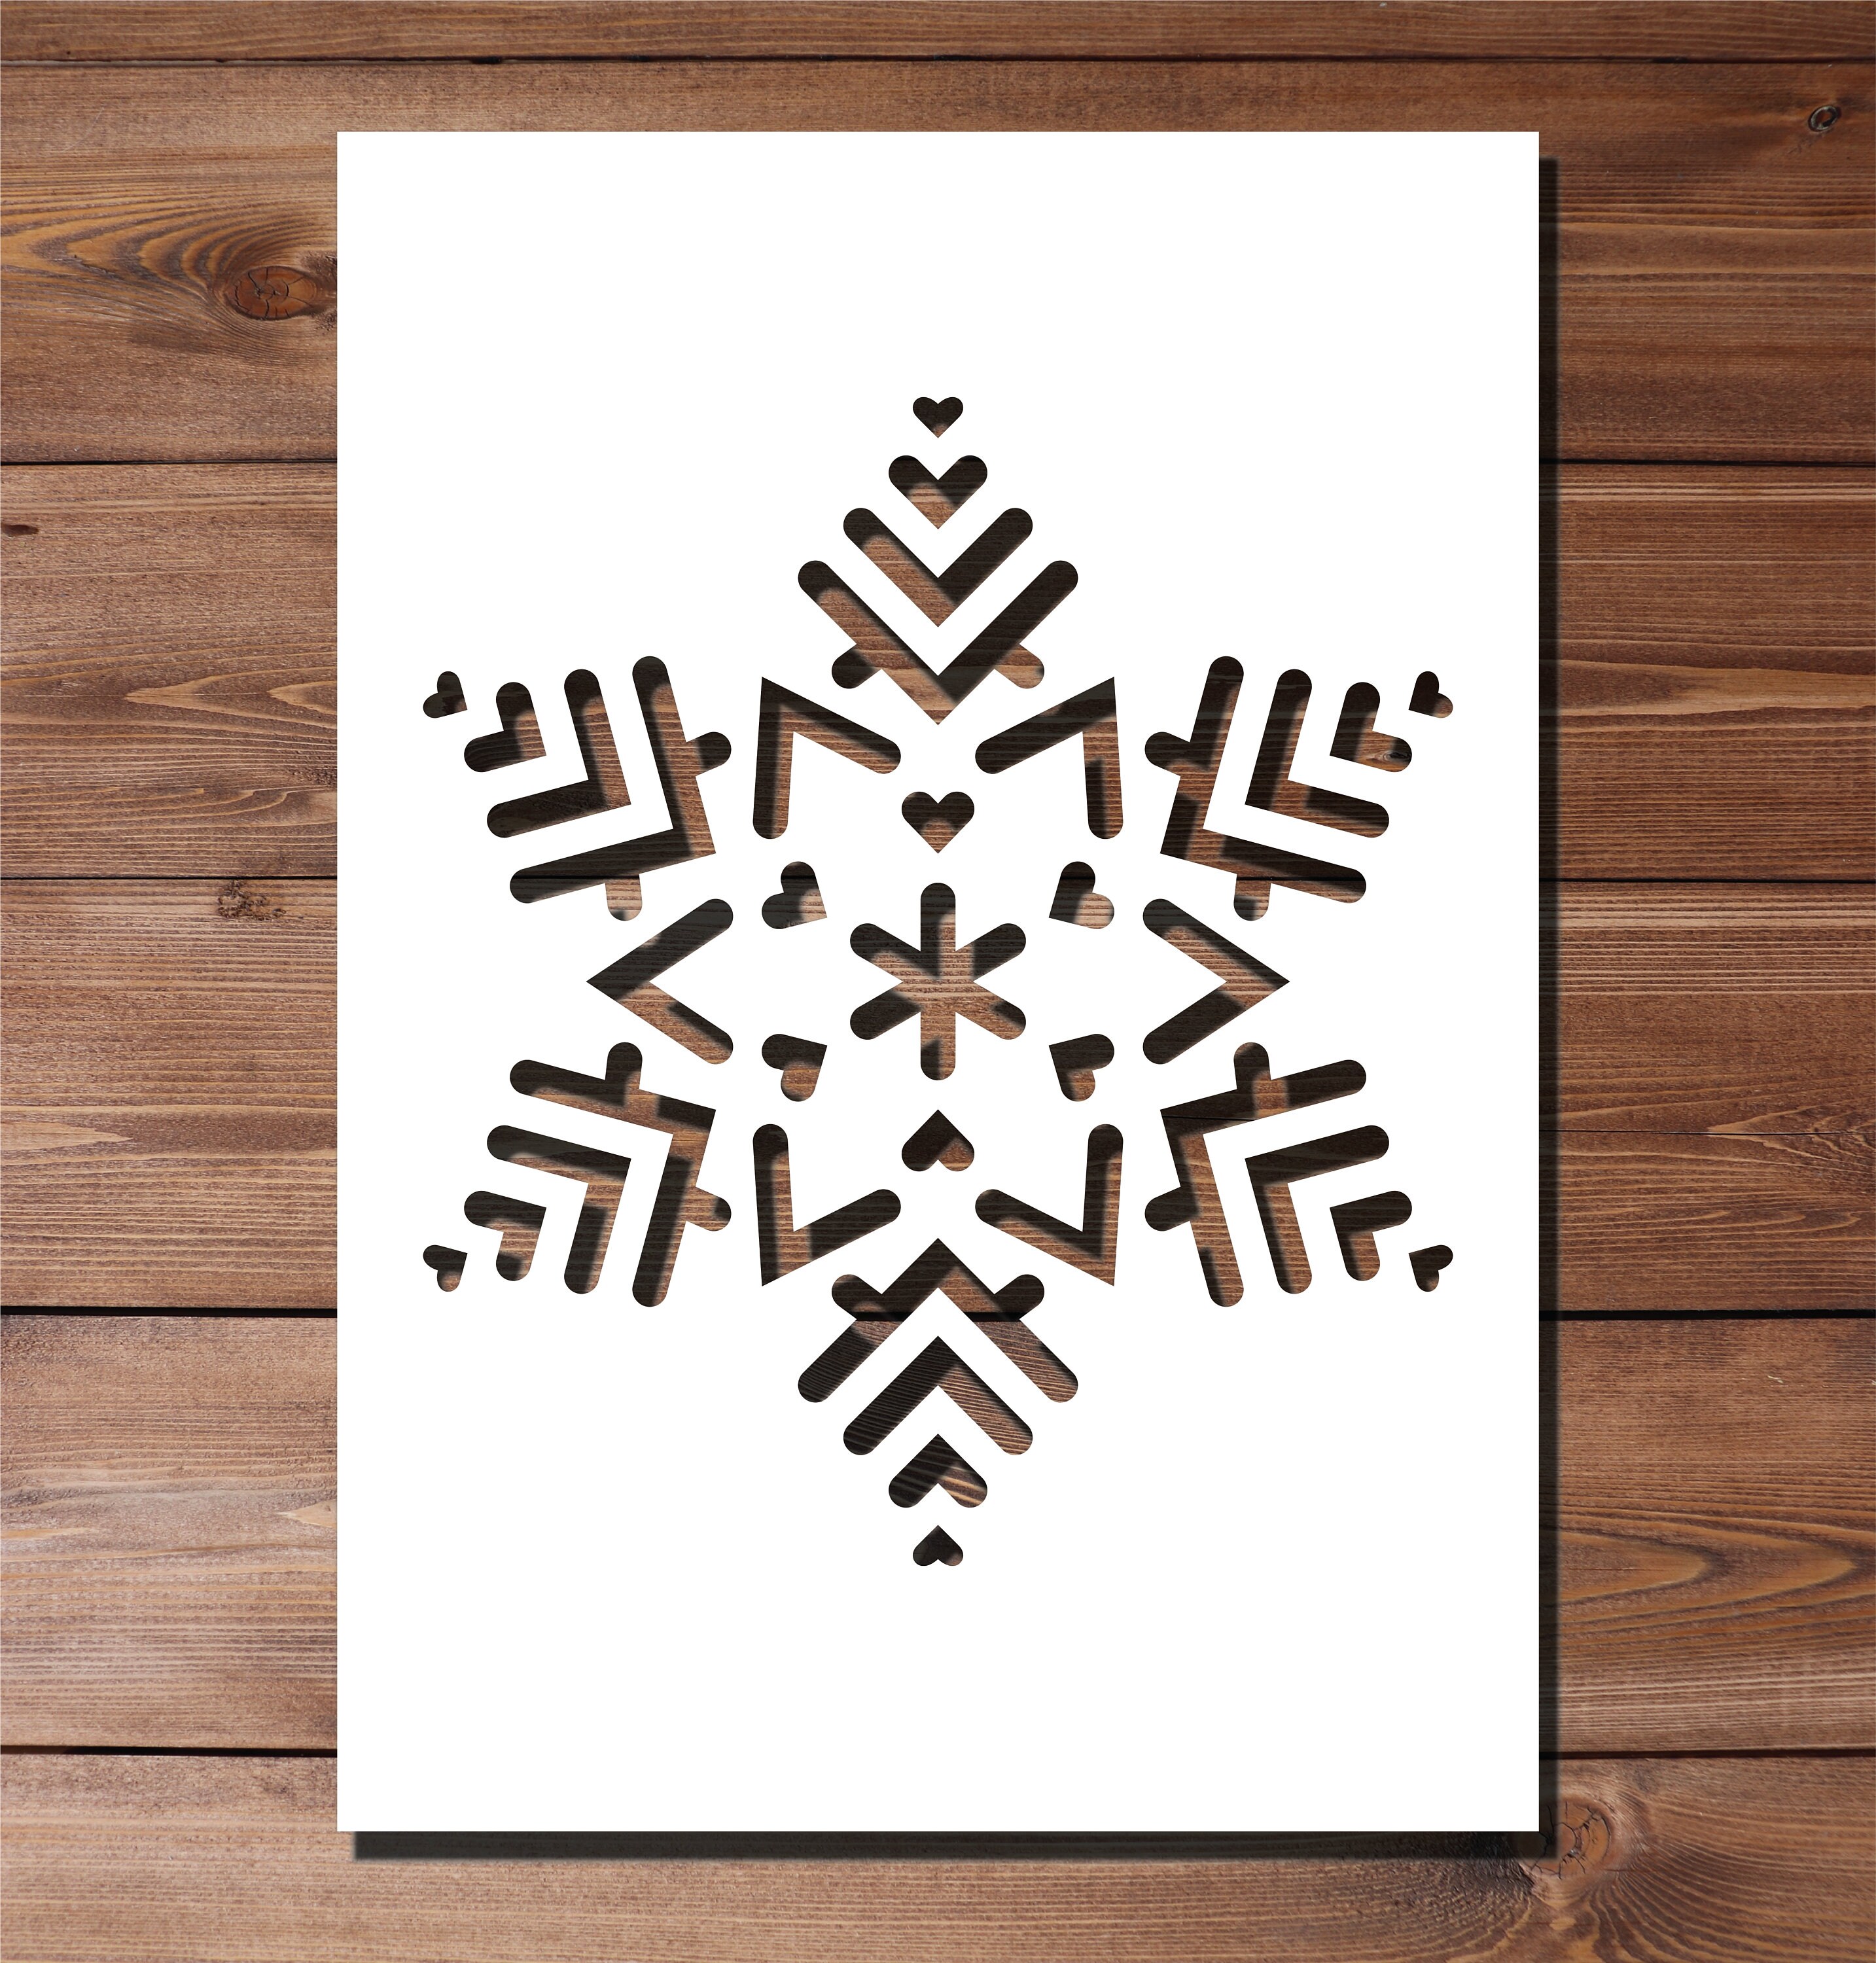 Frosted Mylar 19x24– Griffy's Art Supply